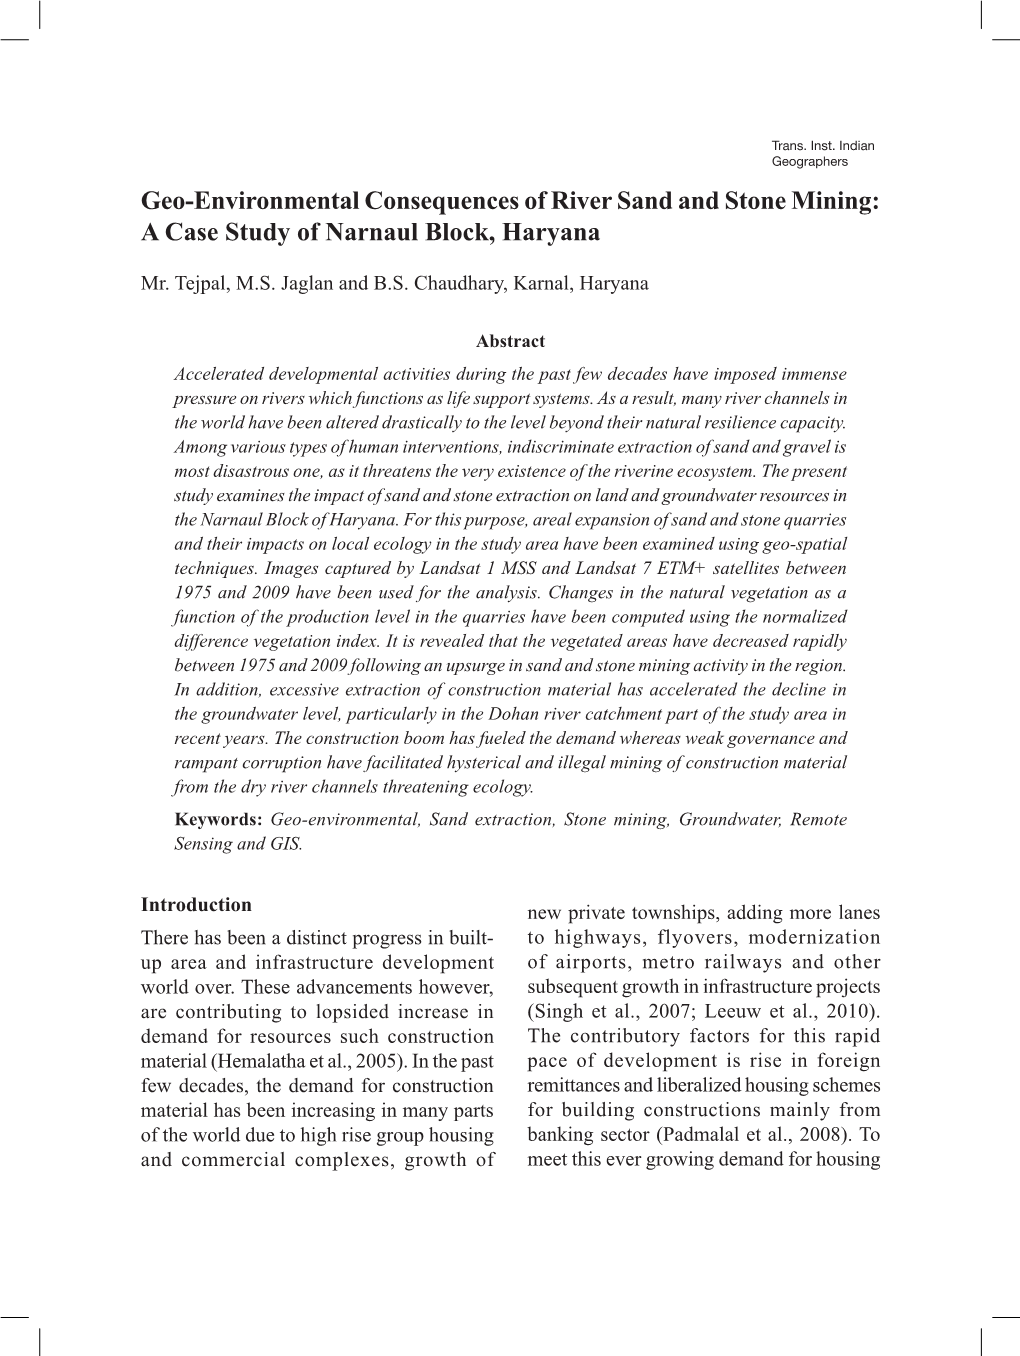 Geo-Environmental Consequences of River Sand and Stone Mining: a Case Study of Narnaul Block, Haryana